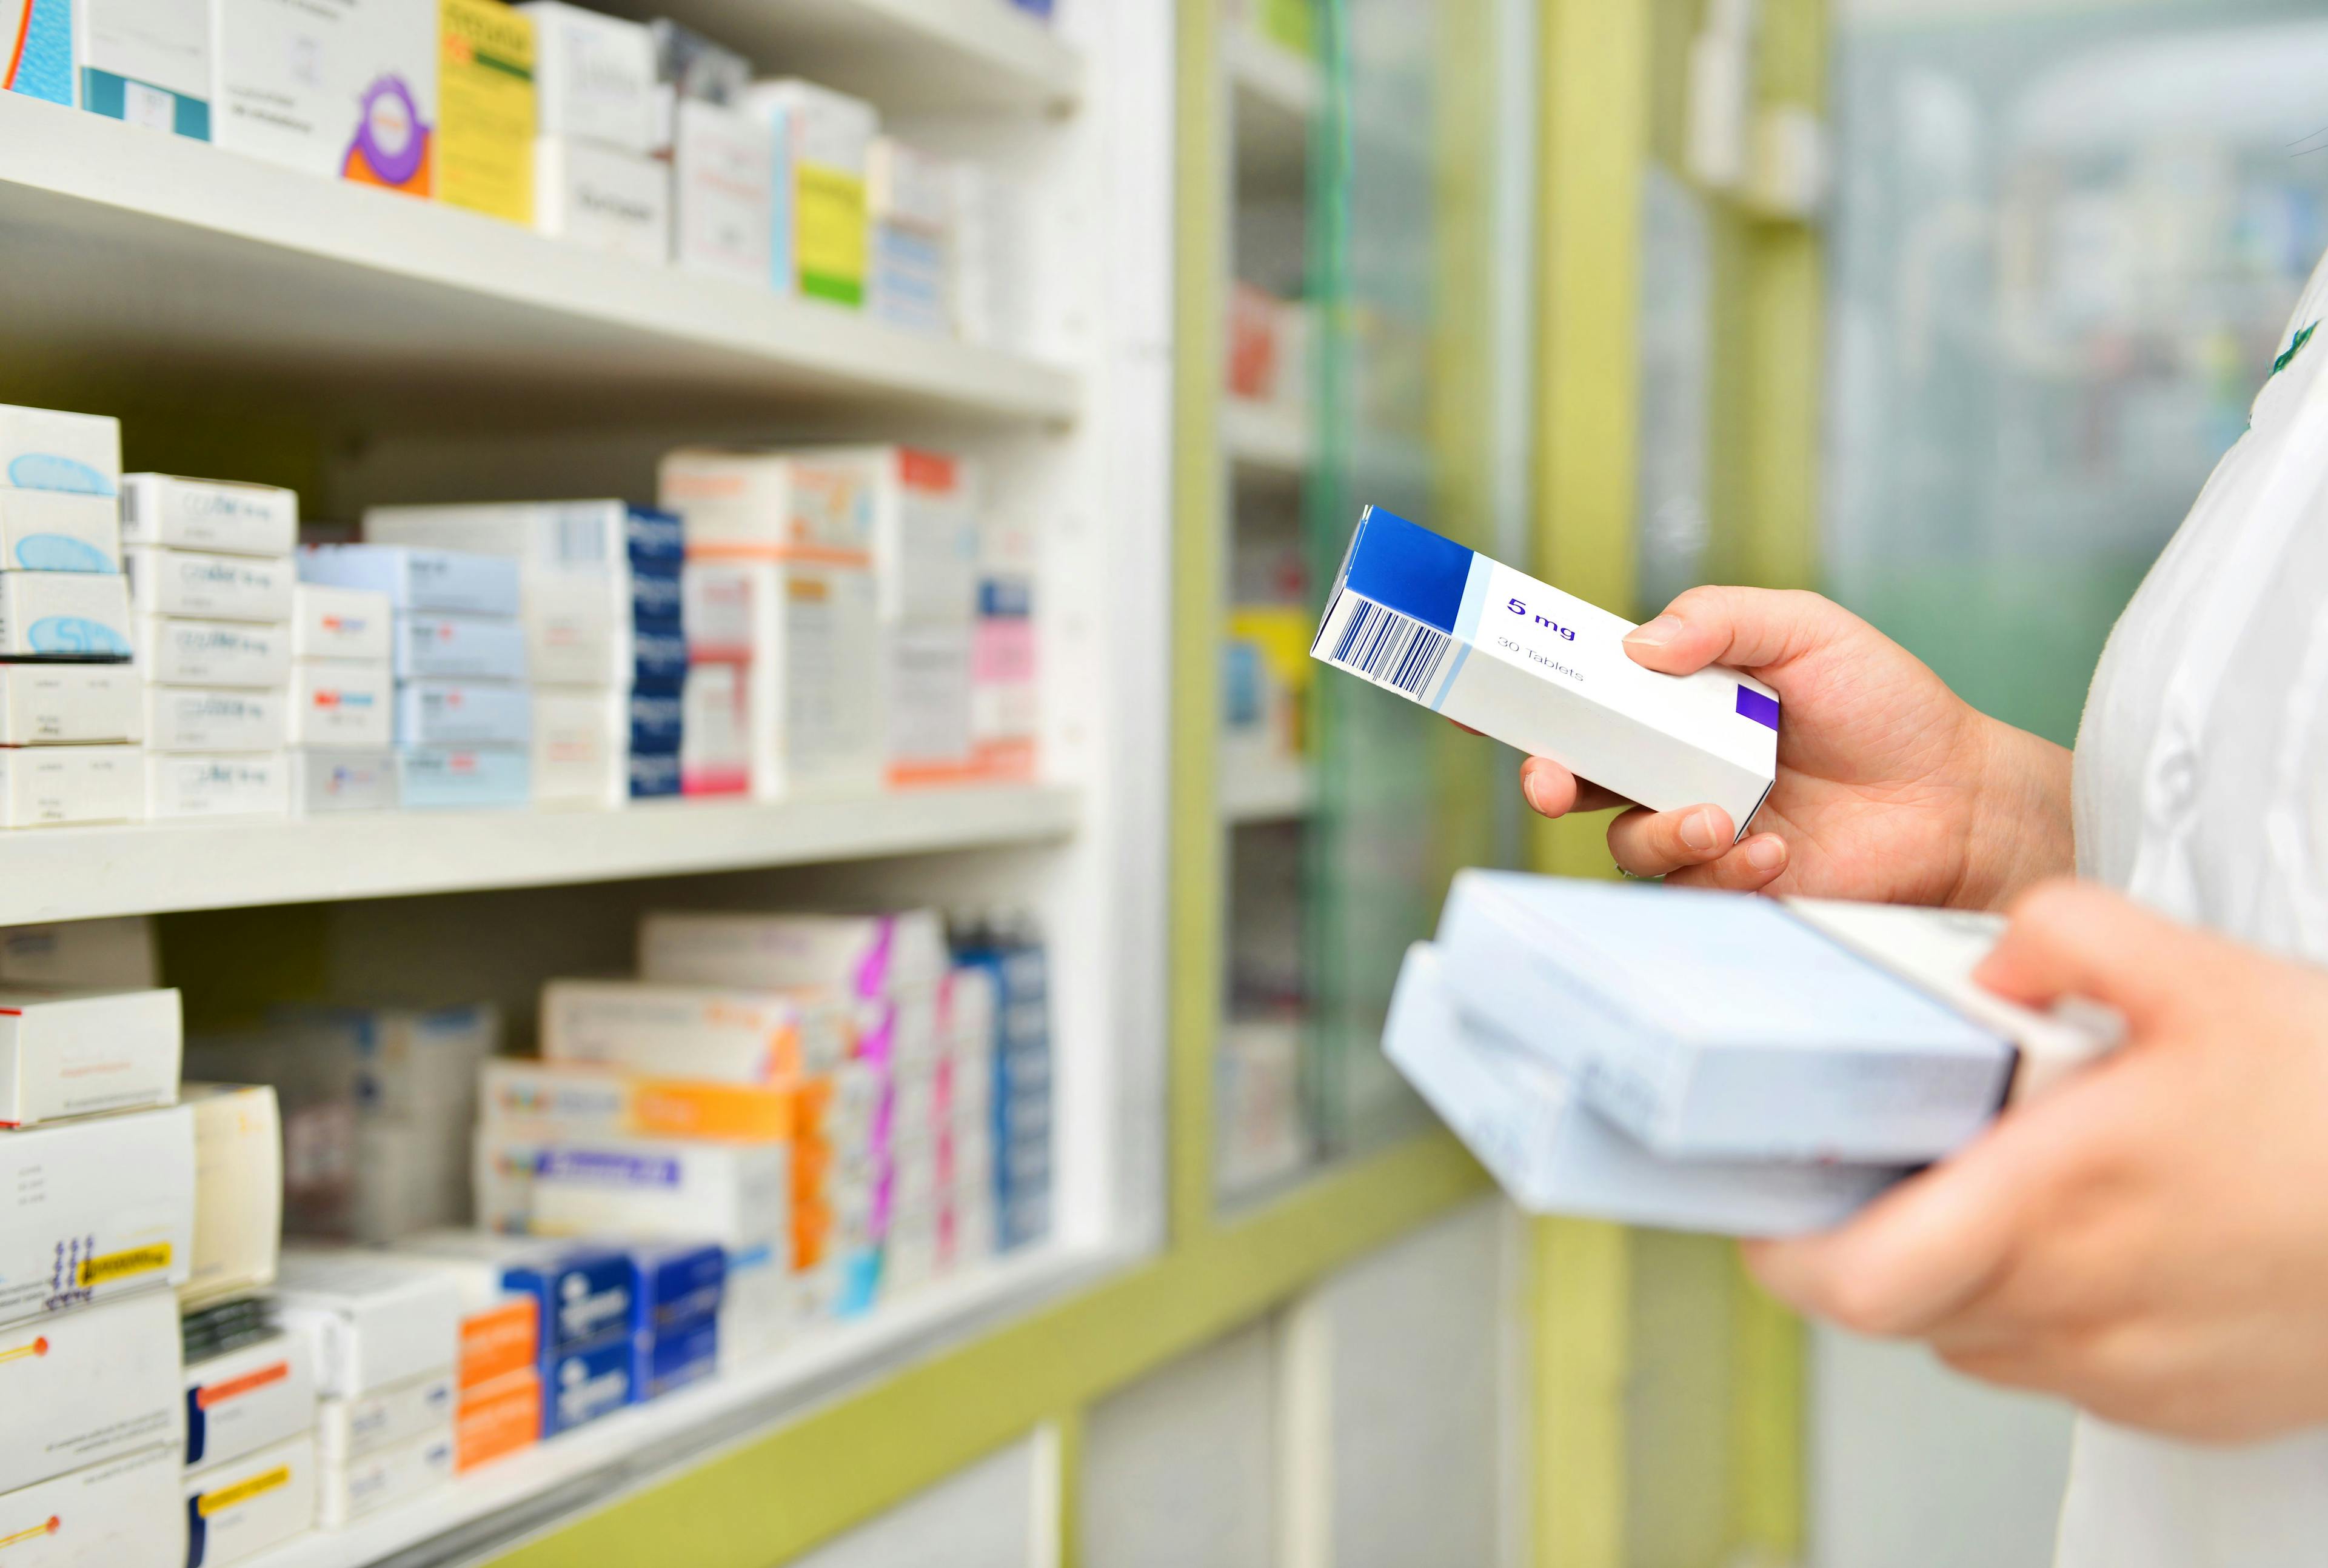 Pharmacists Play Role in Preventing DUIDs